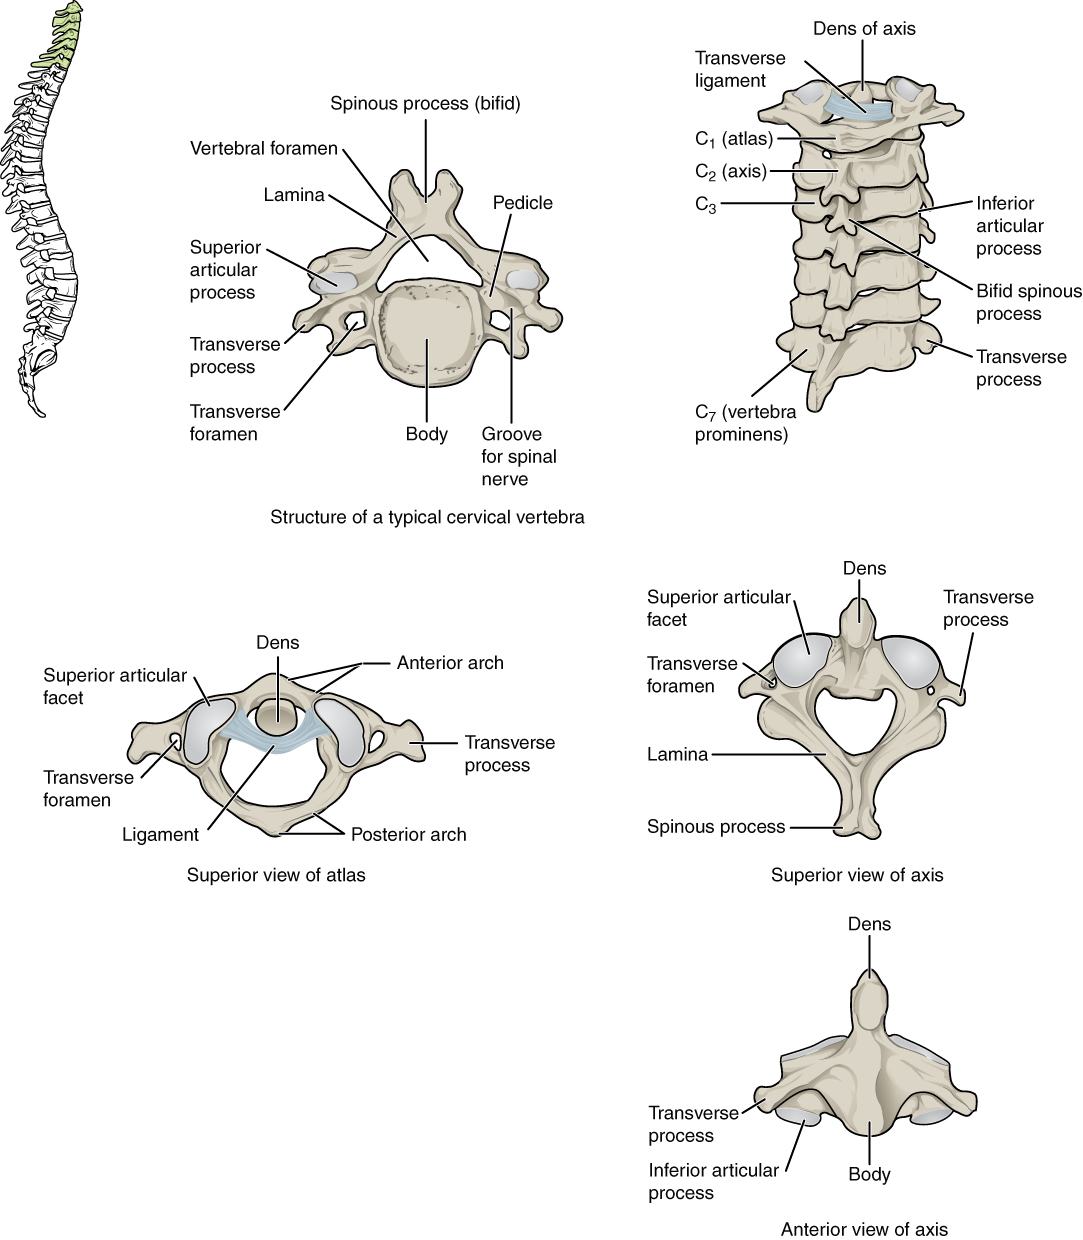 C5 C6 Disc Spinal Fusion Physical Therapy Cervical Herniated Disc Cervical Radiculopathy Spinal Nerve Facet Joints Vertebral Arch Minor Symptoms Upper Arms Invertebral Foramen Pinched Nerve Disc Herniations Bulging Discs